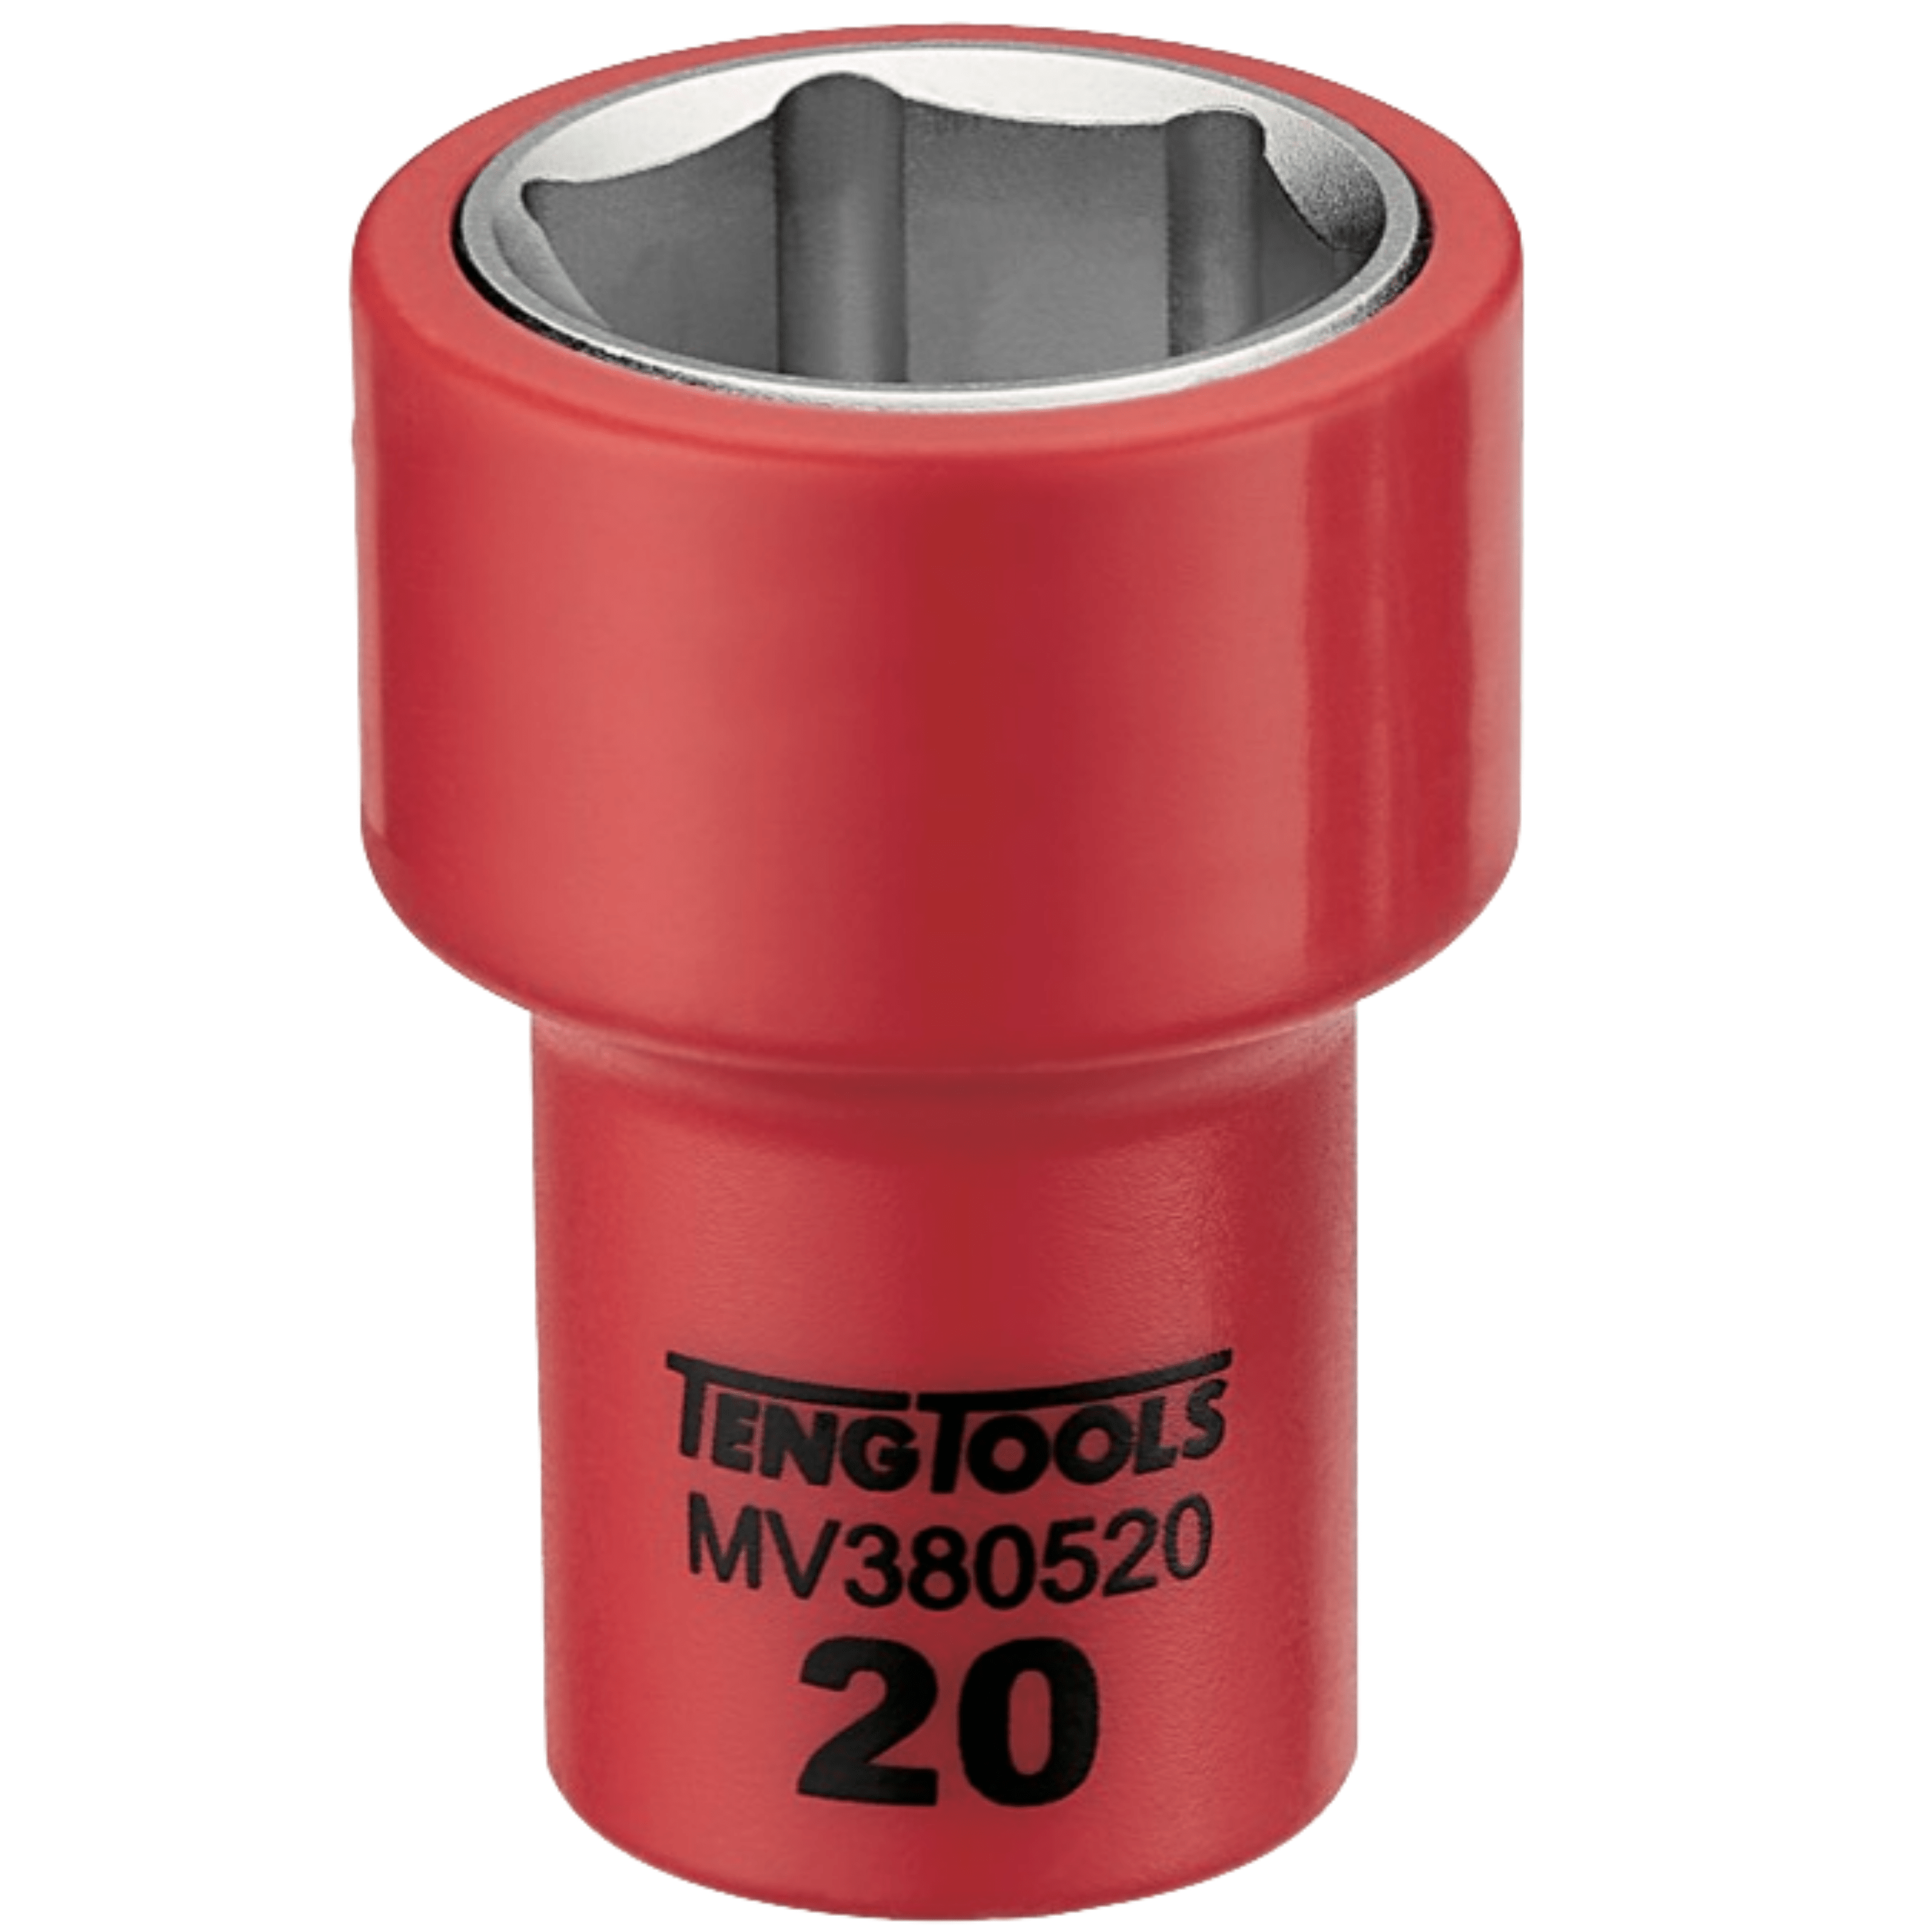 Teng Tools 3/8 Inch Drive Metric 6 Point 1000 Volt Shallow Insulated Sockets - 16mm